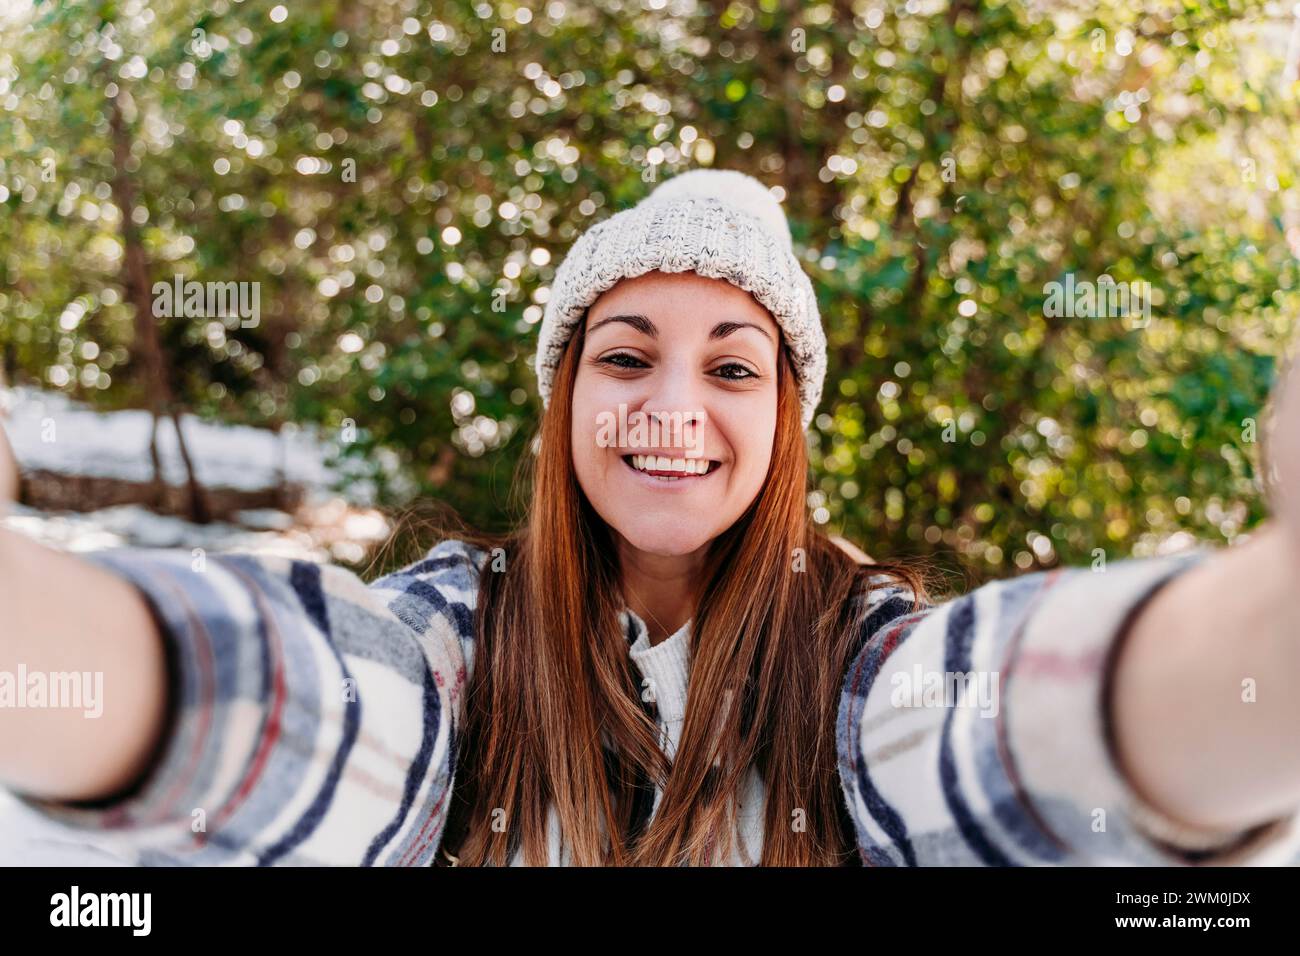 Happy woman wearing knit hat and taking selfie Stock Photo